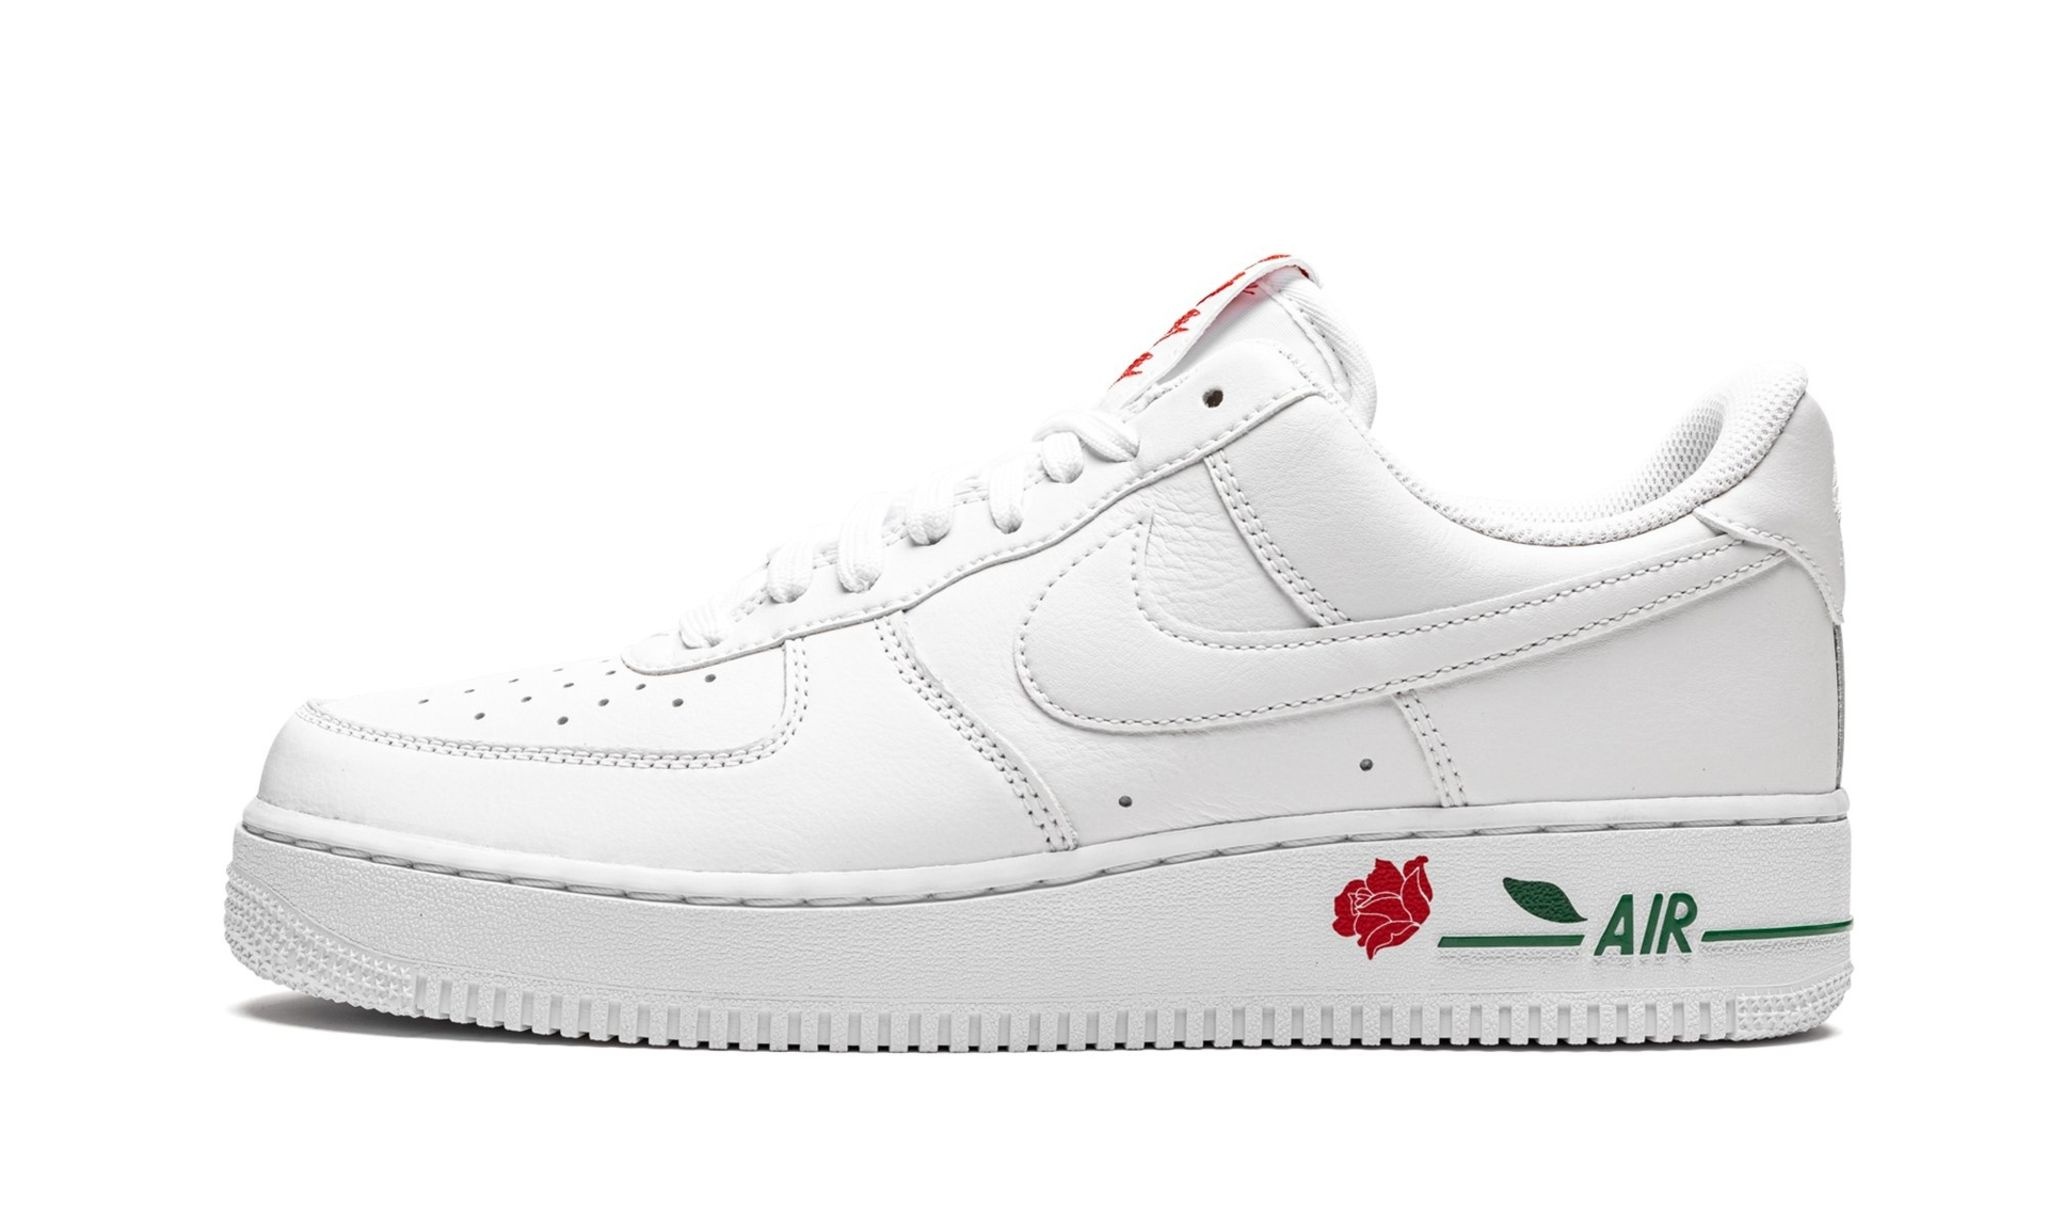 Air Force 1 Low '07 LX "Thank You Plastic Bag" - 1